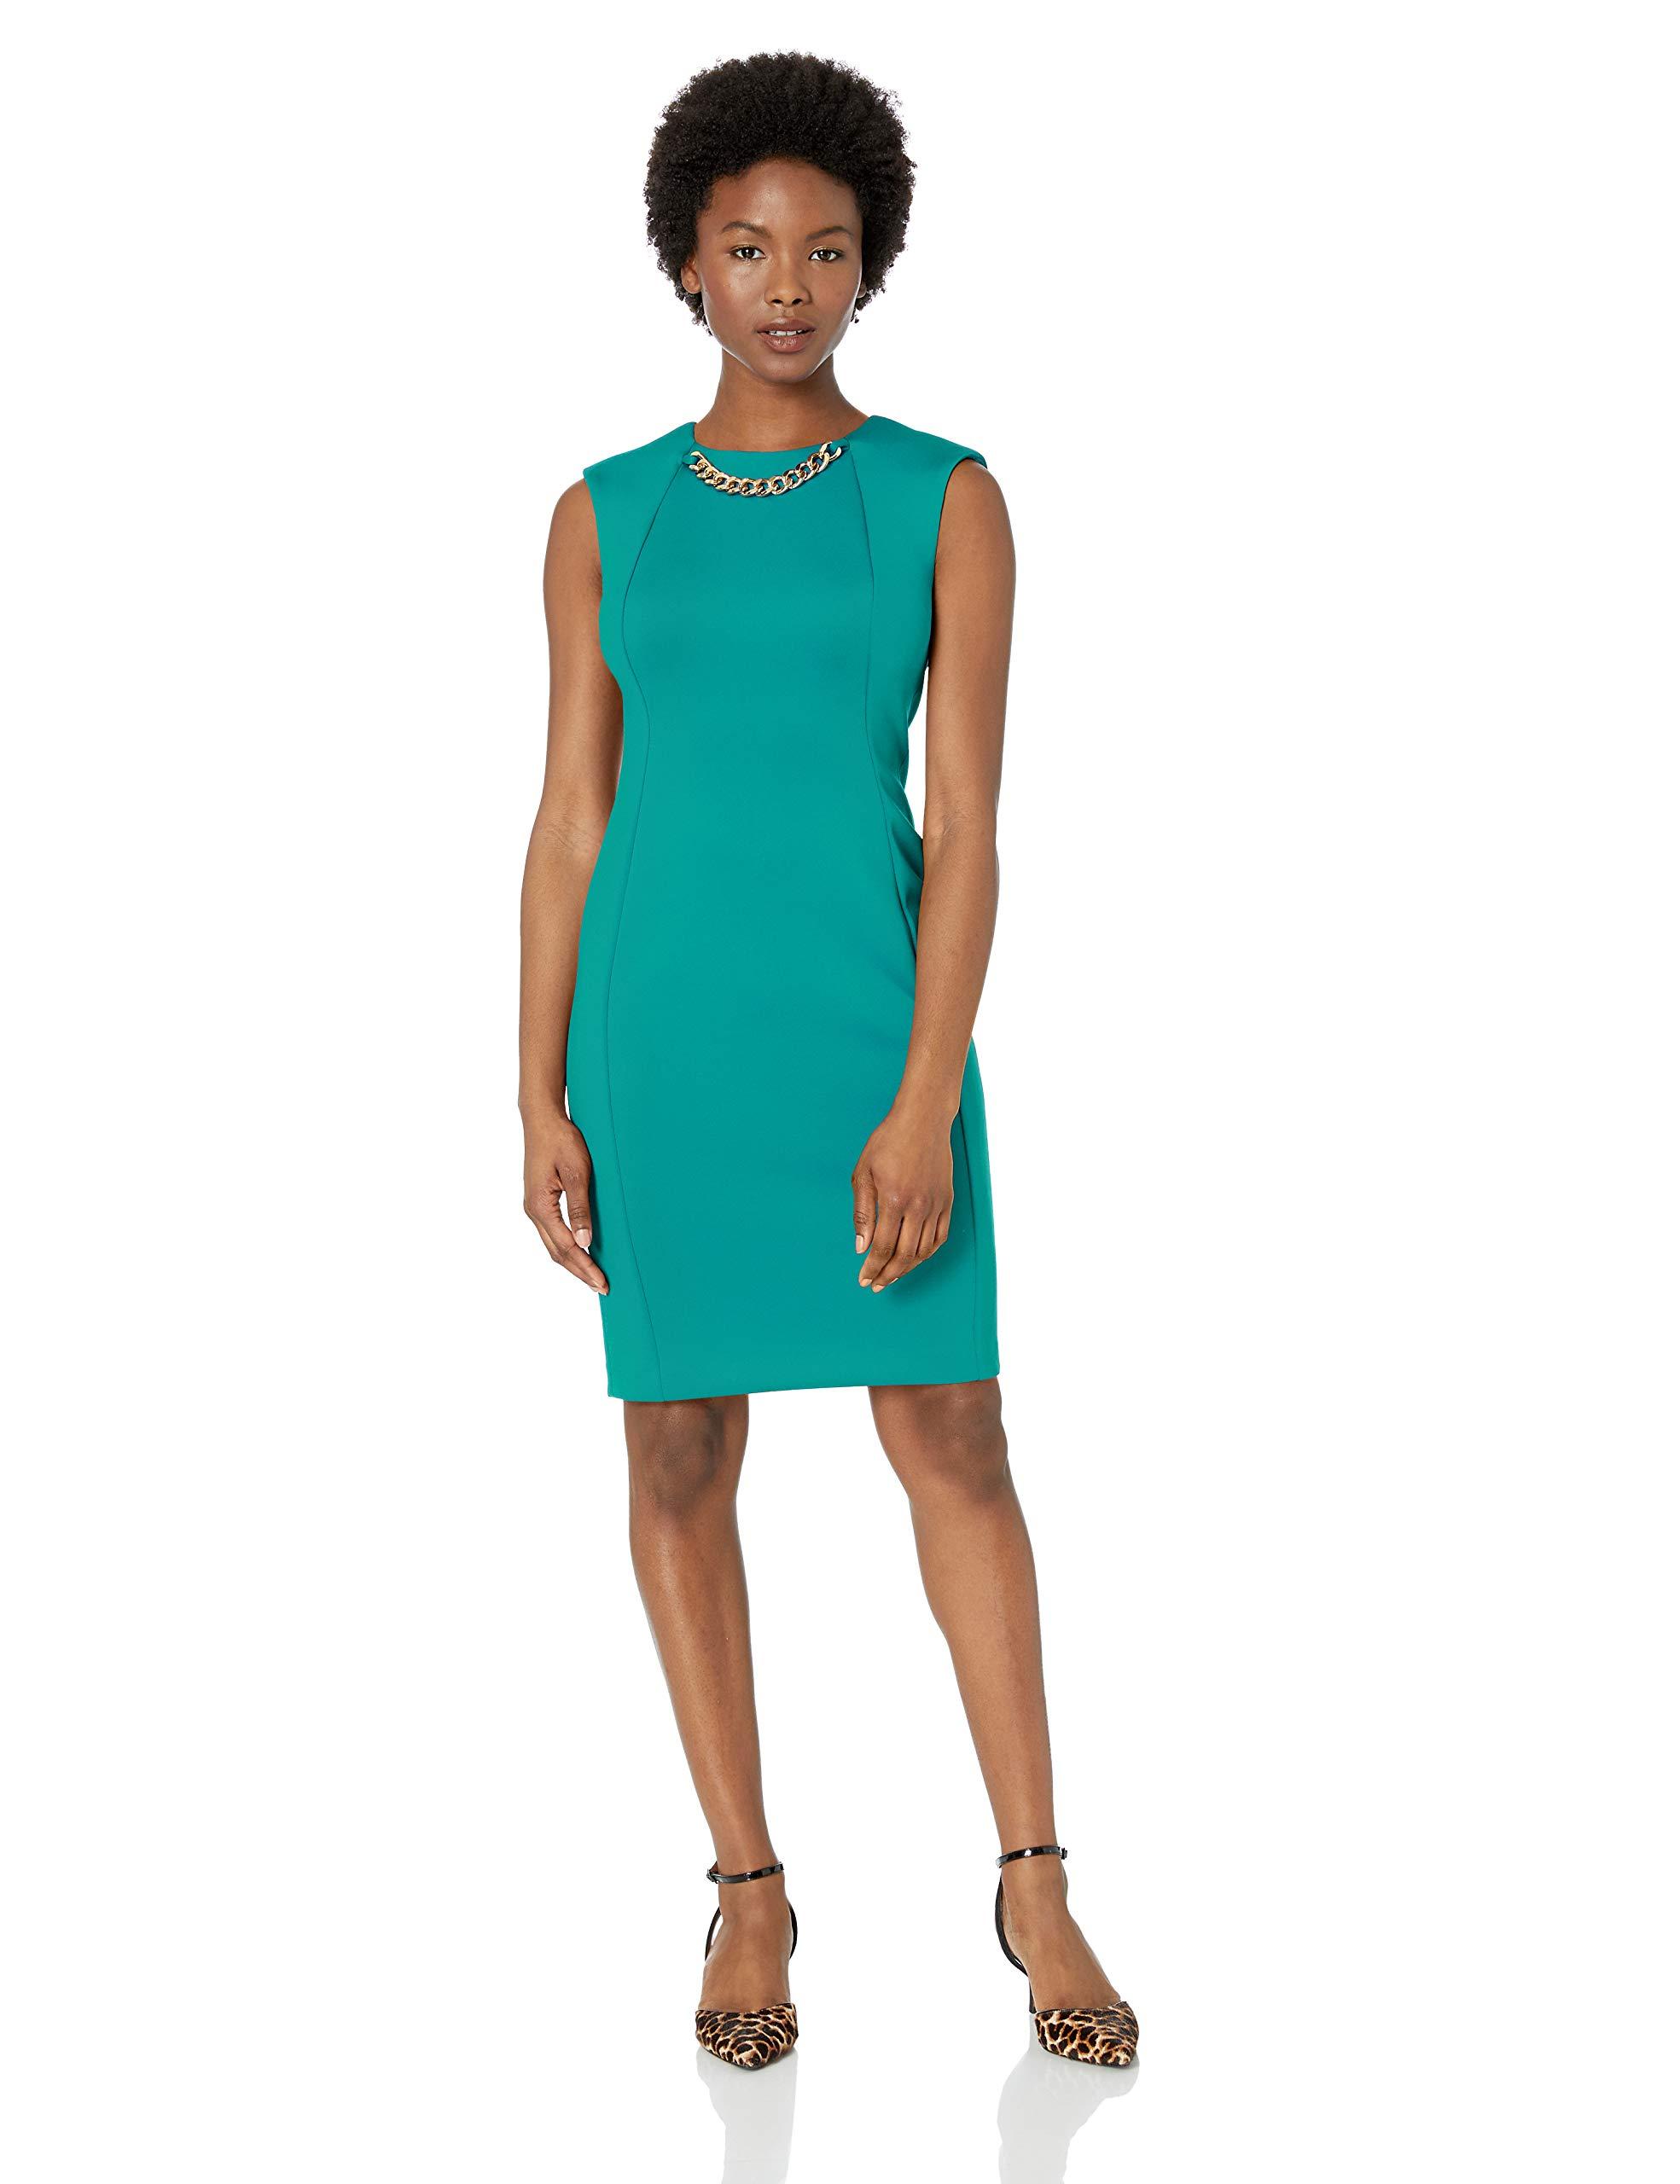 Calvin Klein Sleeveless Sheath With Chain Necklace Dress in Blue - Lyst